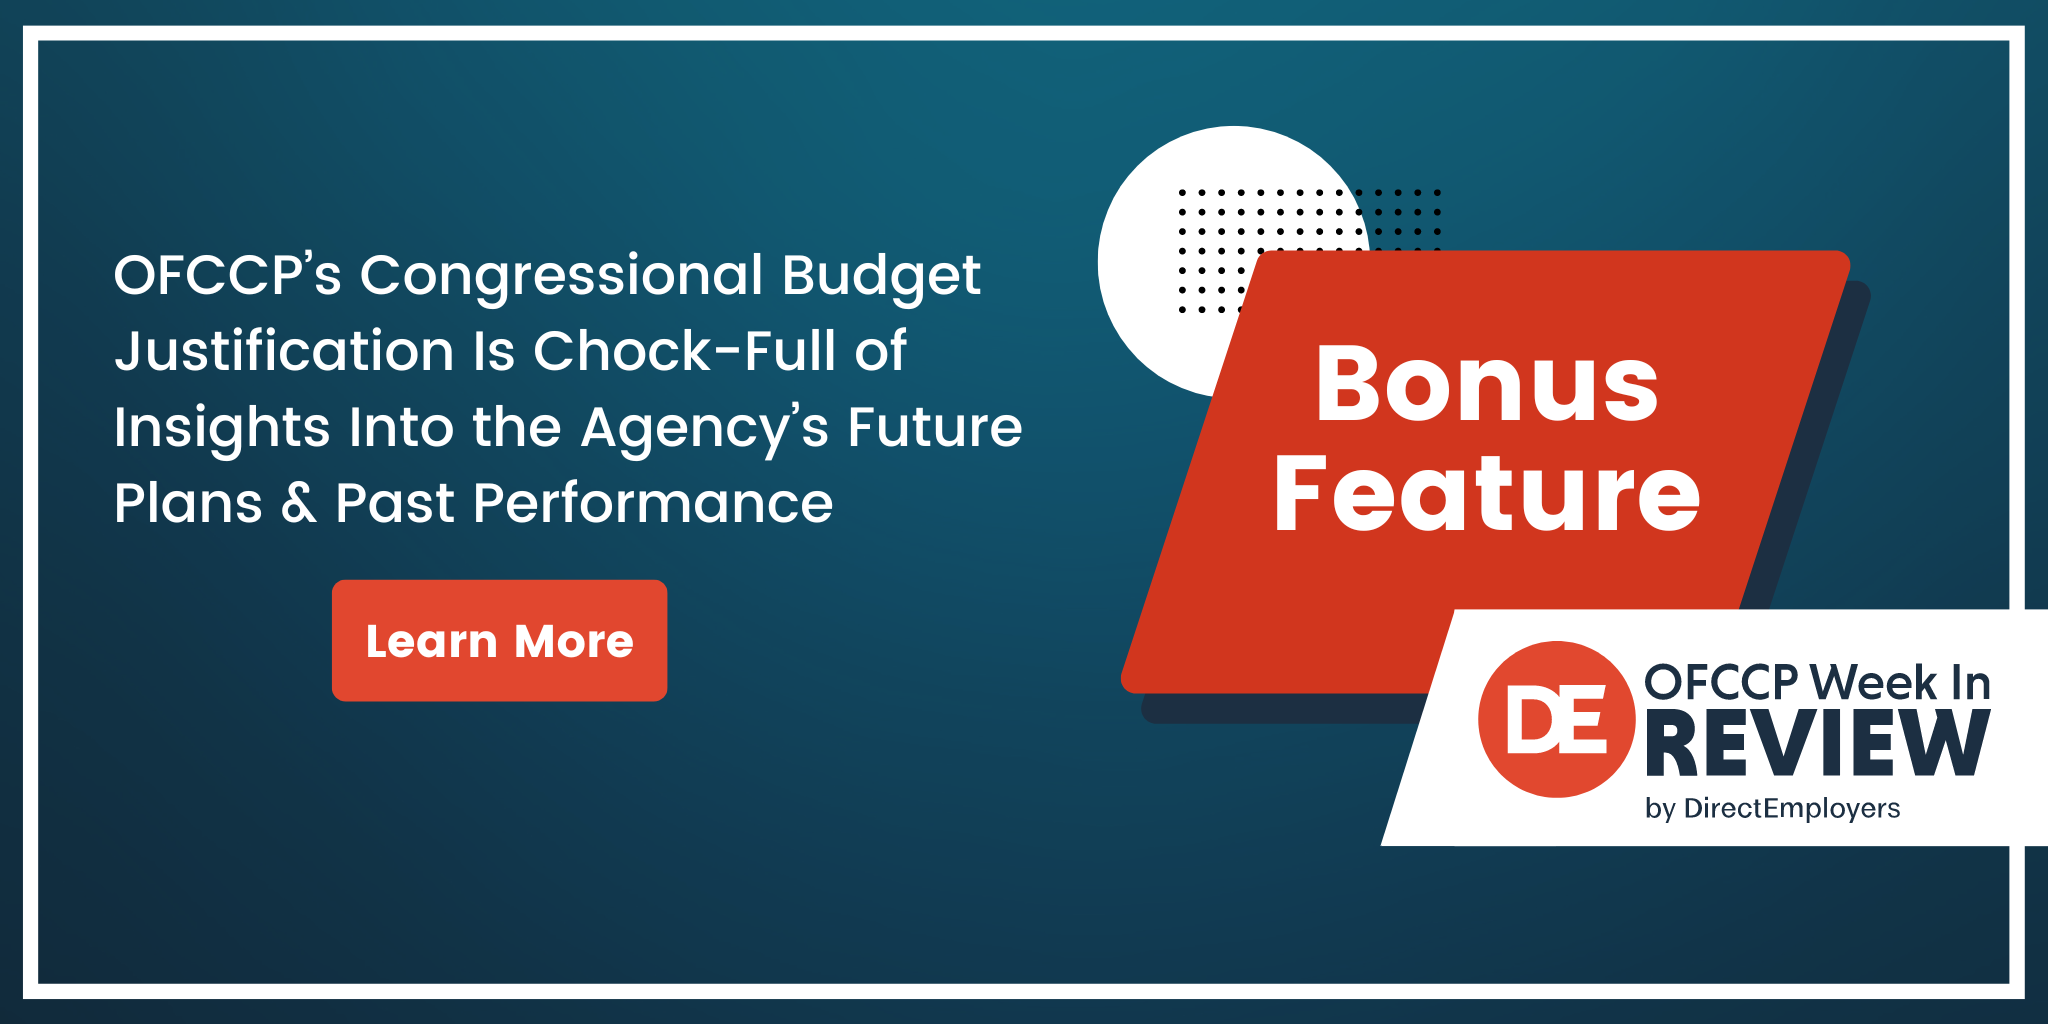 Bonus Feature | OFCCP’s Congressional Budget Justification Is Chock-Full of Insights Into the Agency’s Future Plans & Past Performance